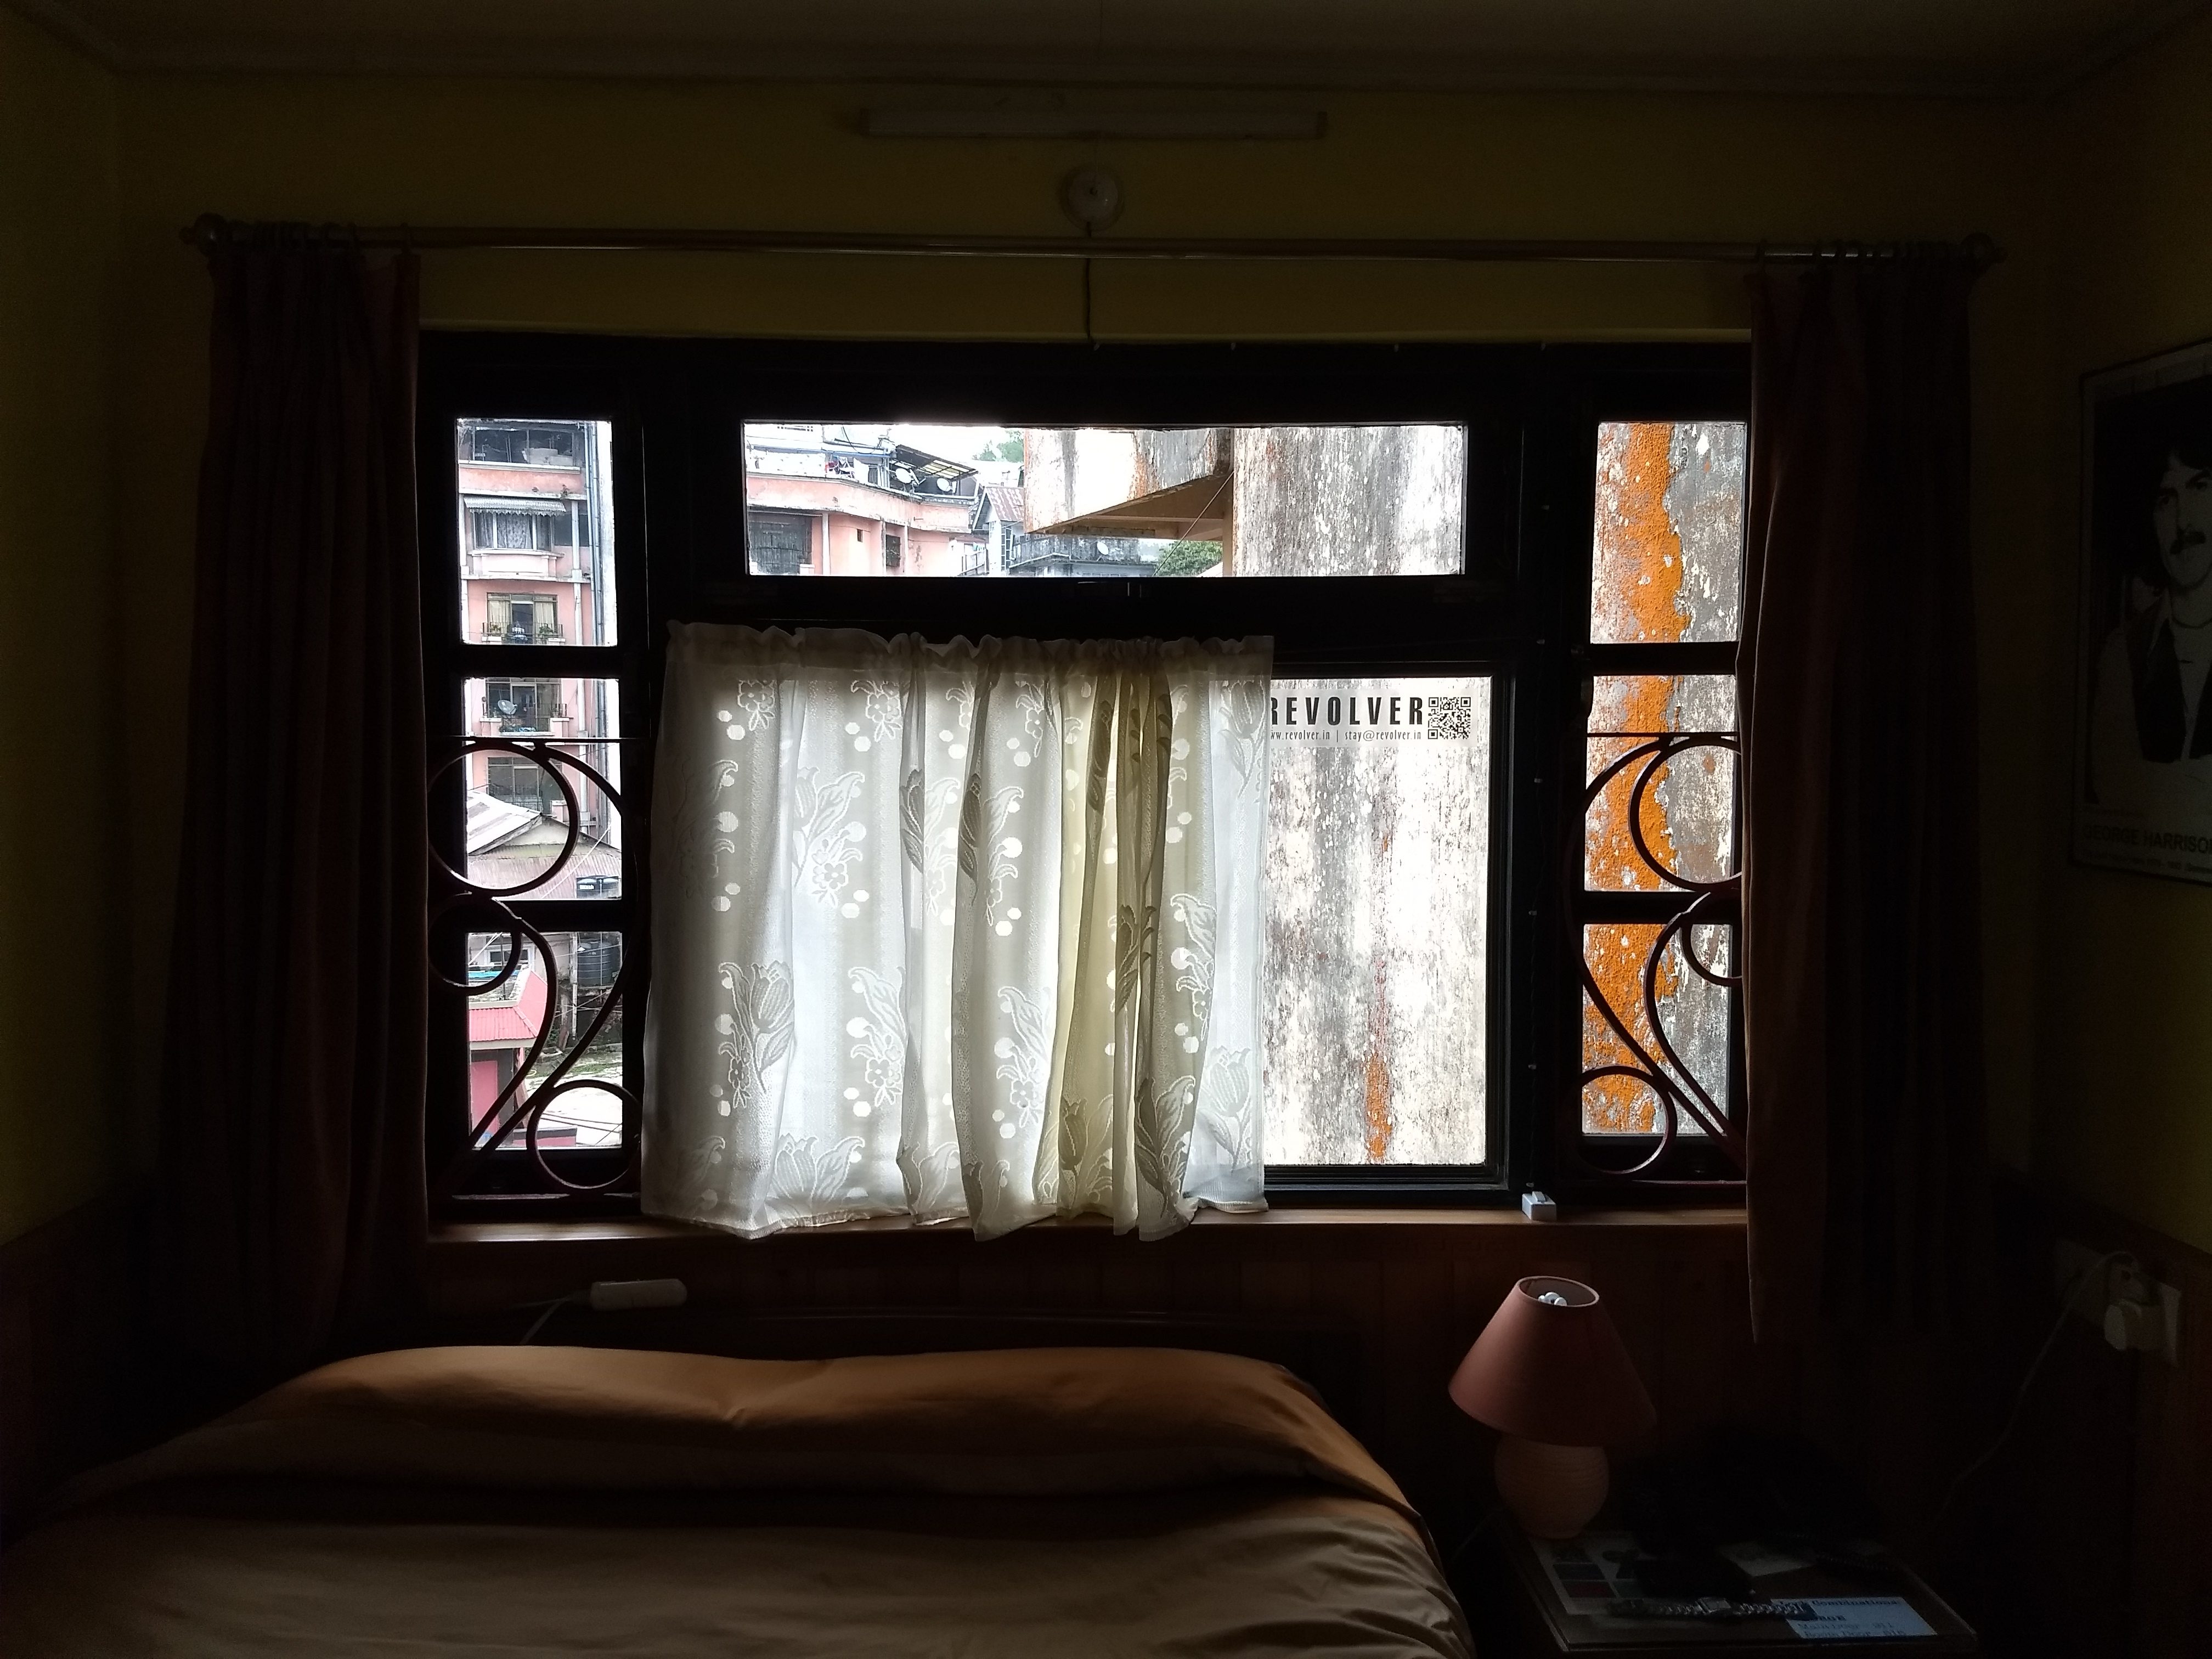 Revolver, Darjeeling: A Home Away from Home